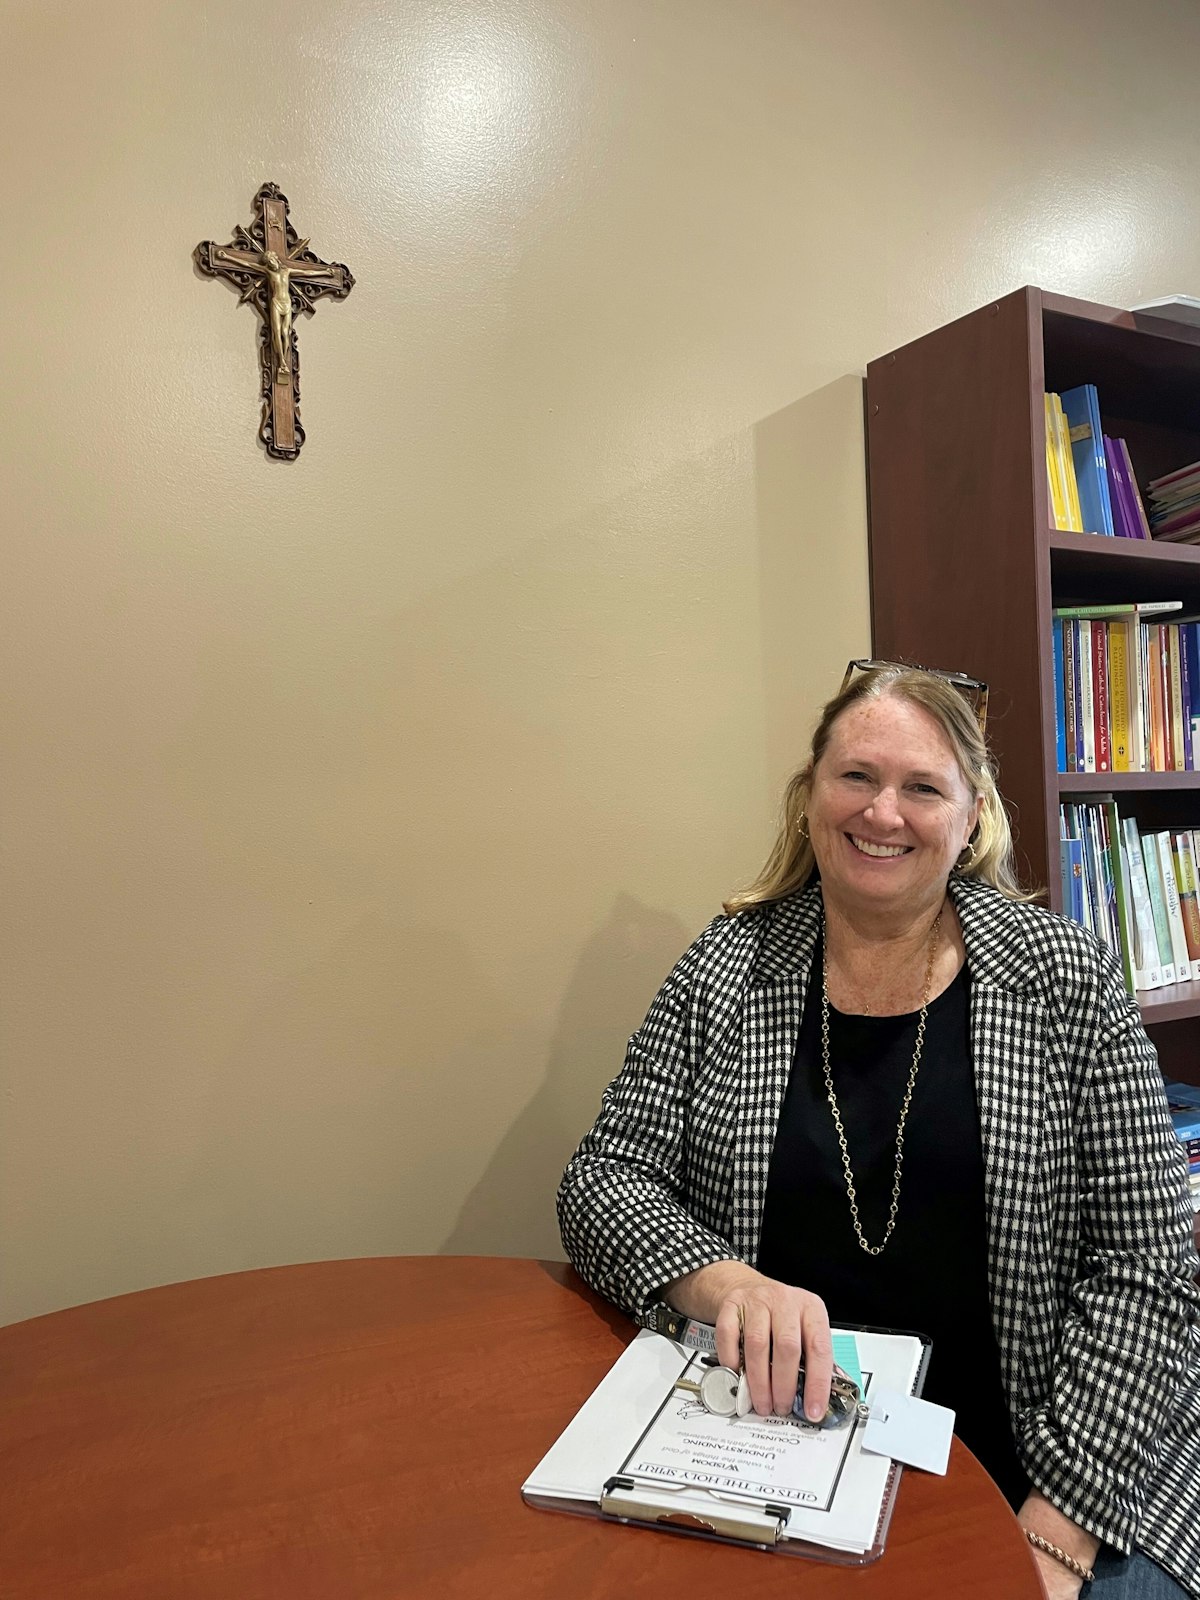 Today, Maureen Apap relishes the opportunity to help children at Holy Name grow in the same faith that sustained her during her most difficult times, a faith that her husband shared. "He just had a very deep faith, and it gave him a sense of peace and calmness," Maureen said.